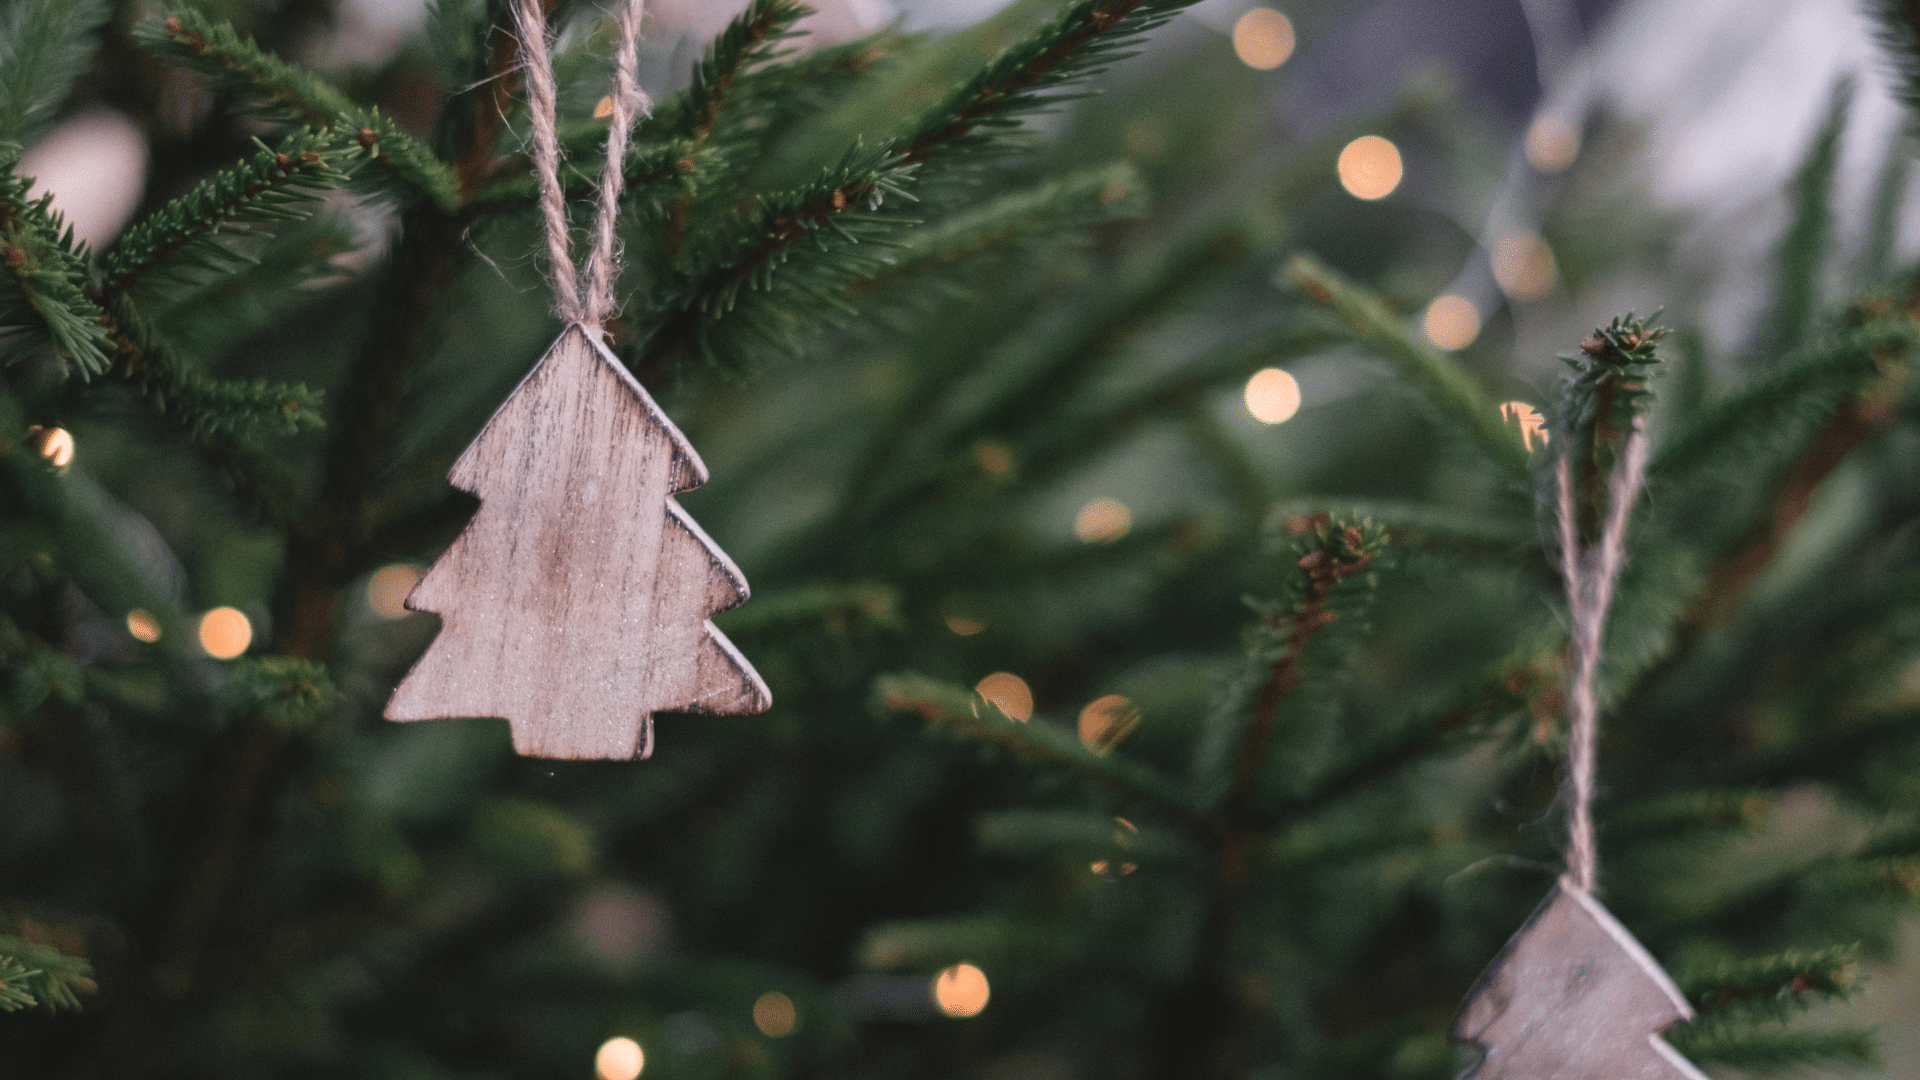 Sustainable wooden ornament on a Christmas tree